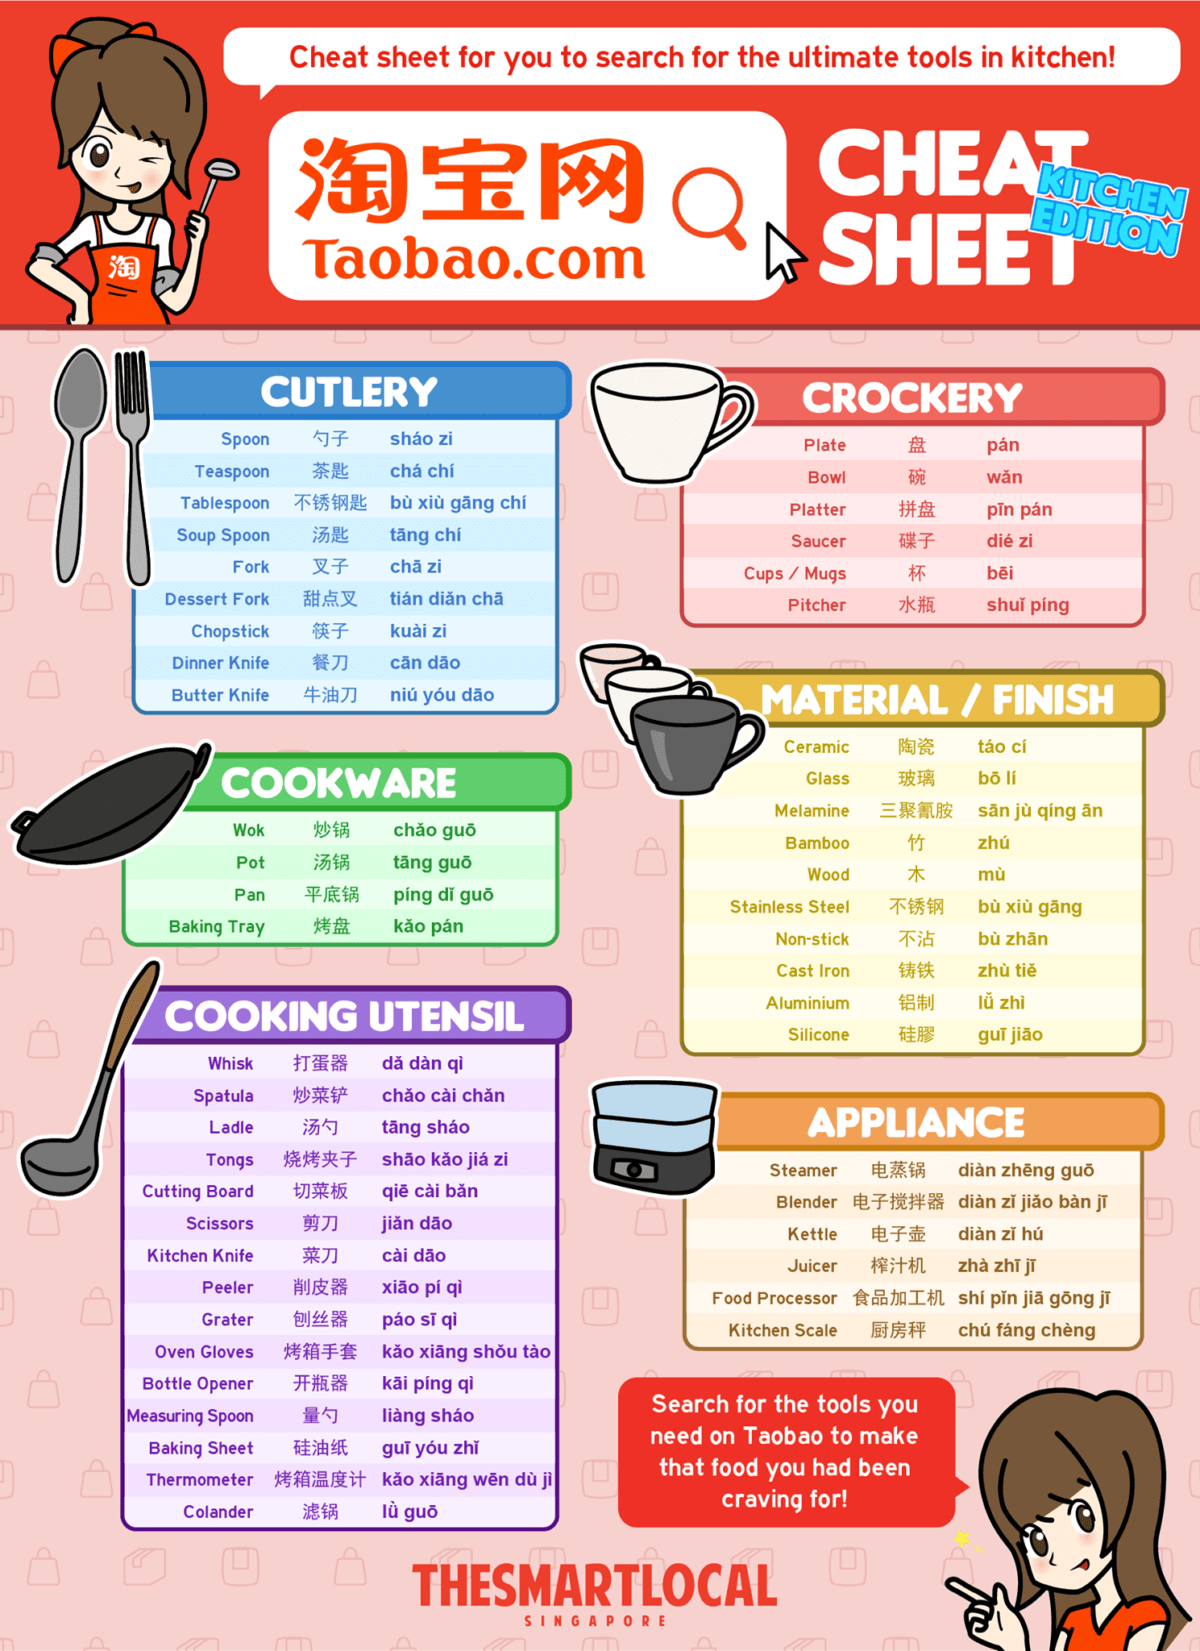 Cheat sheet in Chinese to search for kitchen tools in Taobao